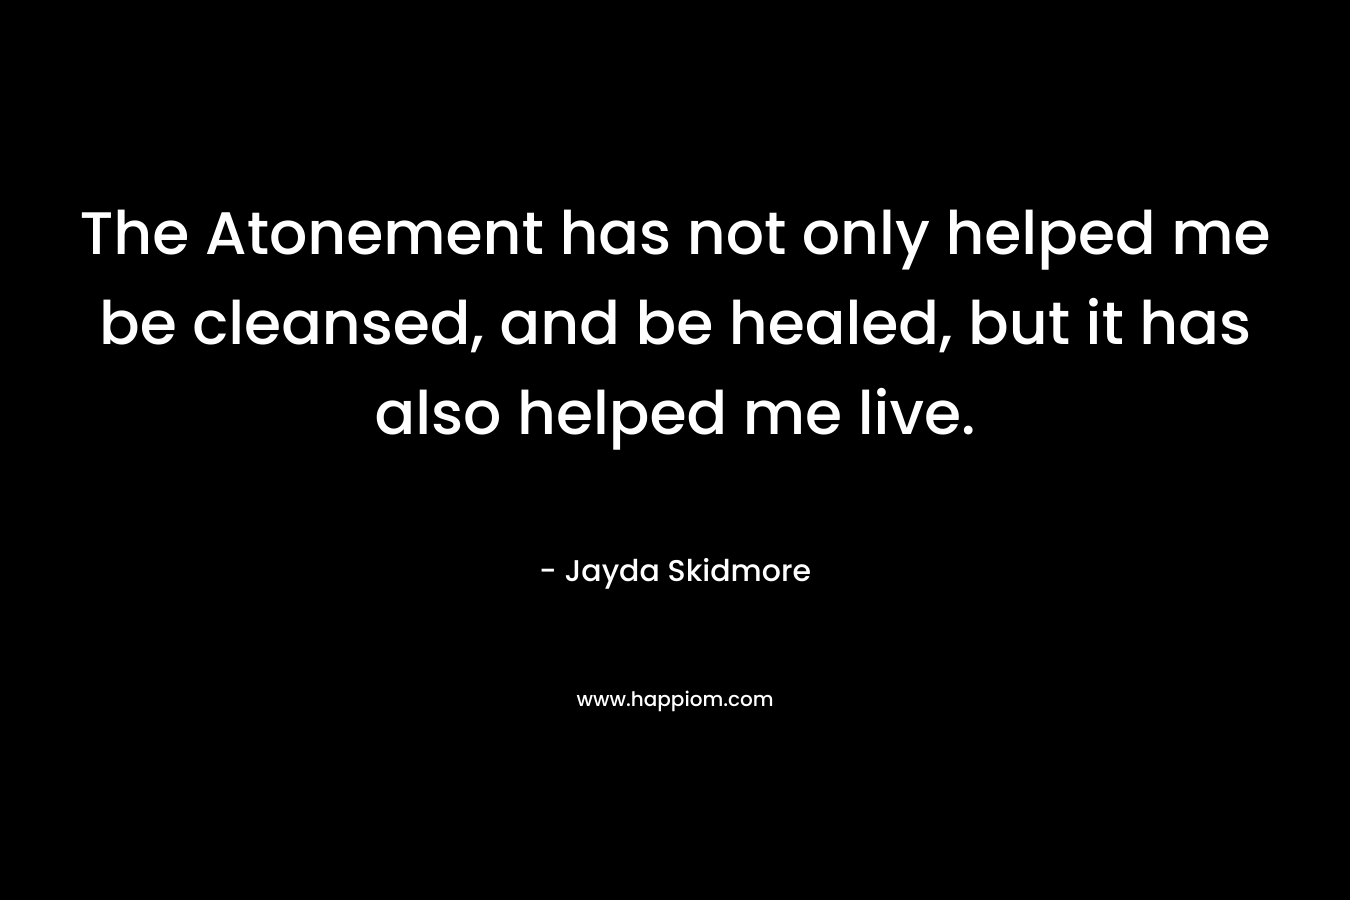 The Atonement has not only helped me be cleansed, and be healed, but it has also helped me live.